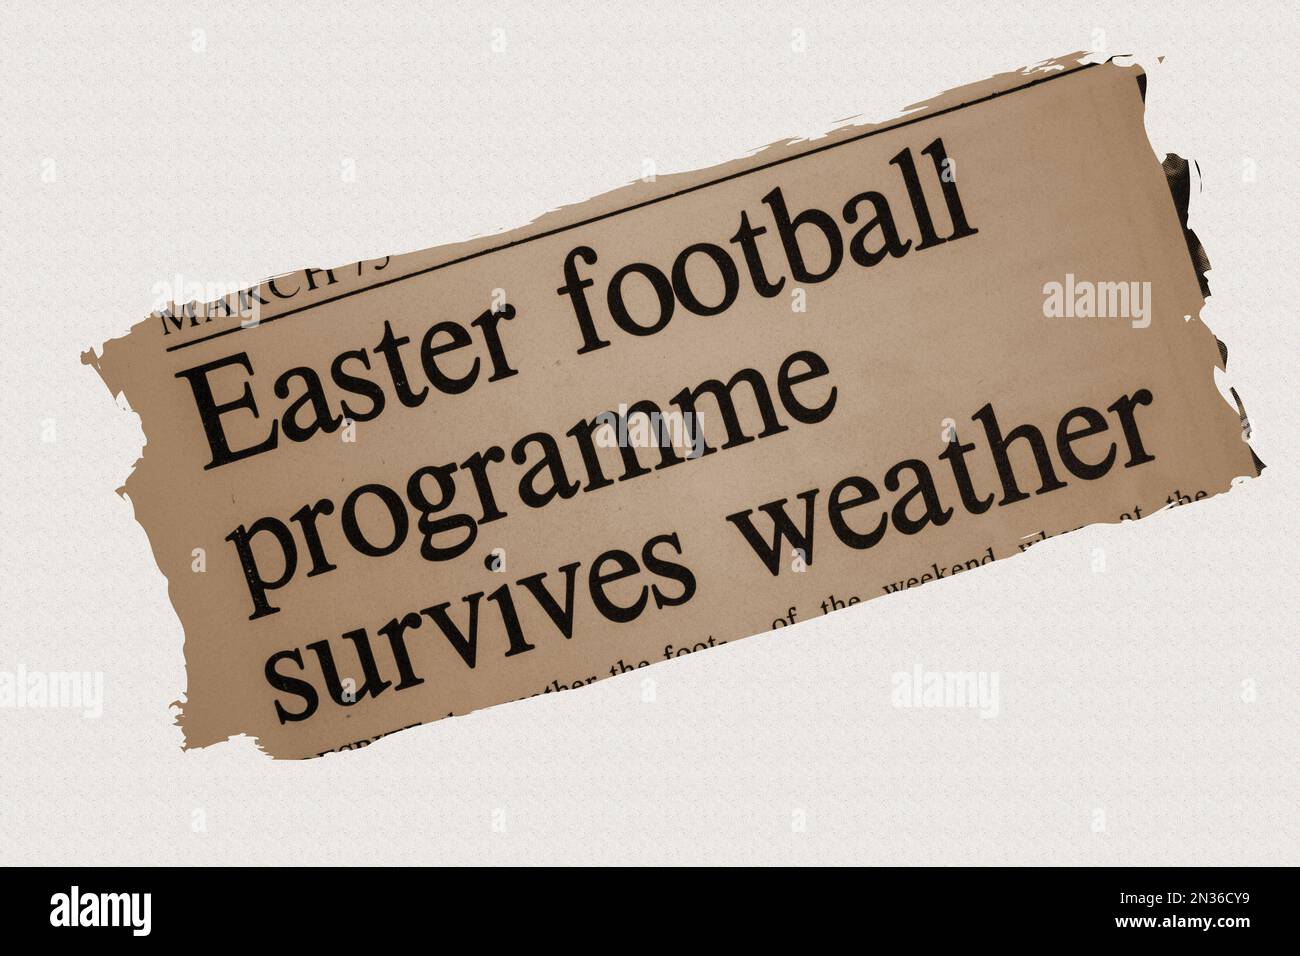 Easter football programme survives weather - news story from 1975 newspaper headline article title in sepia Stock Photo